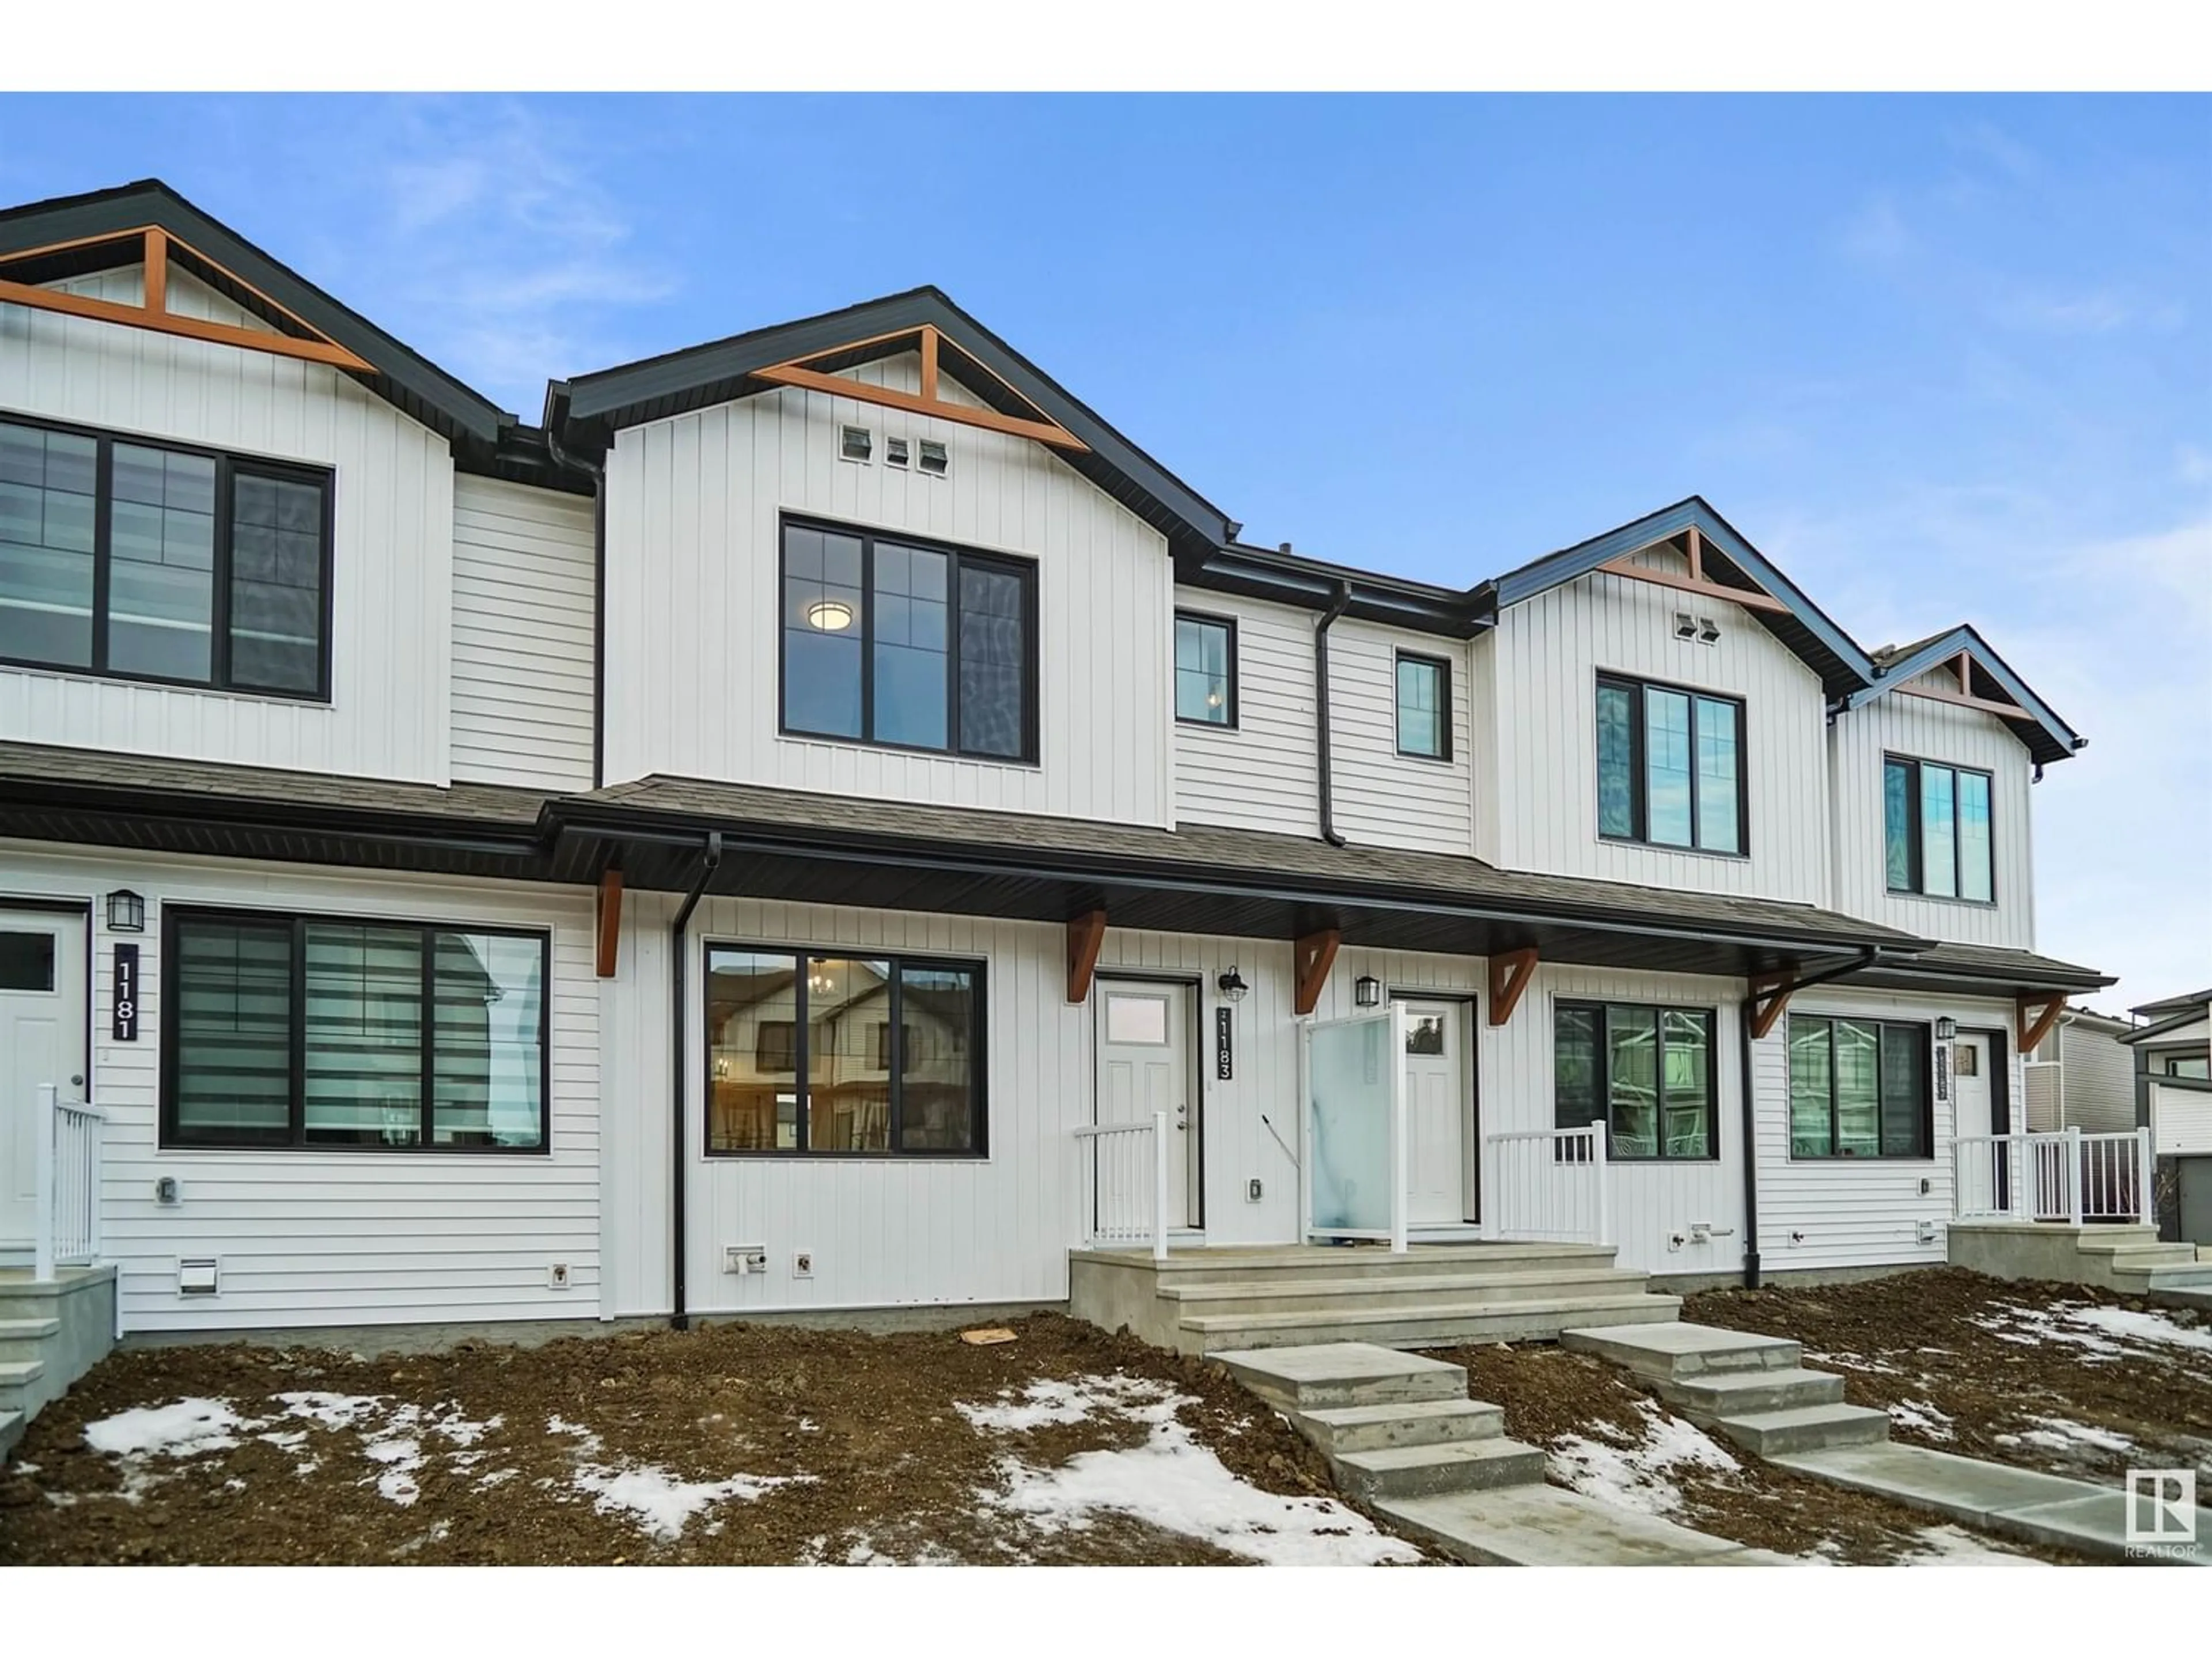 A pic from exterior of the house or condo for #13 525 Secord BV NW, Edmonton Alberta T5T4A4